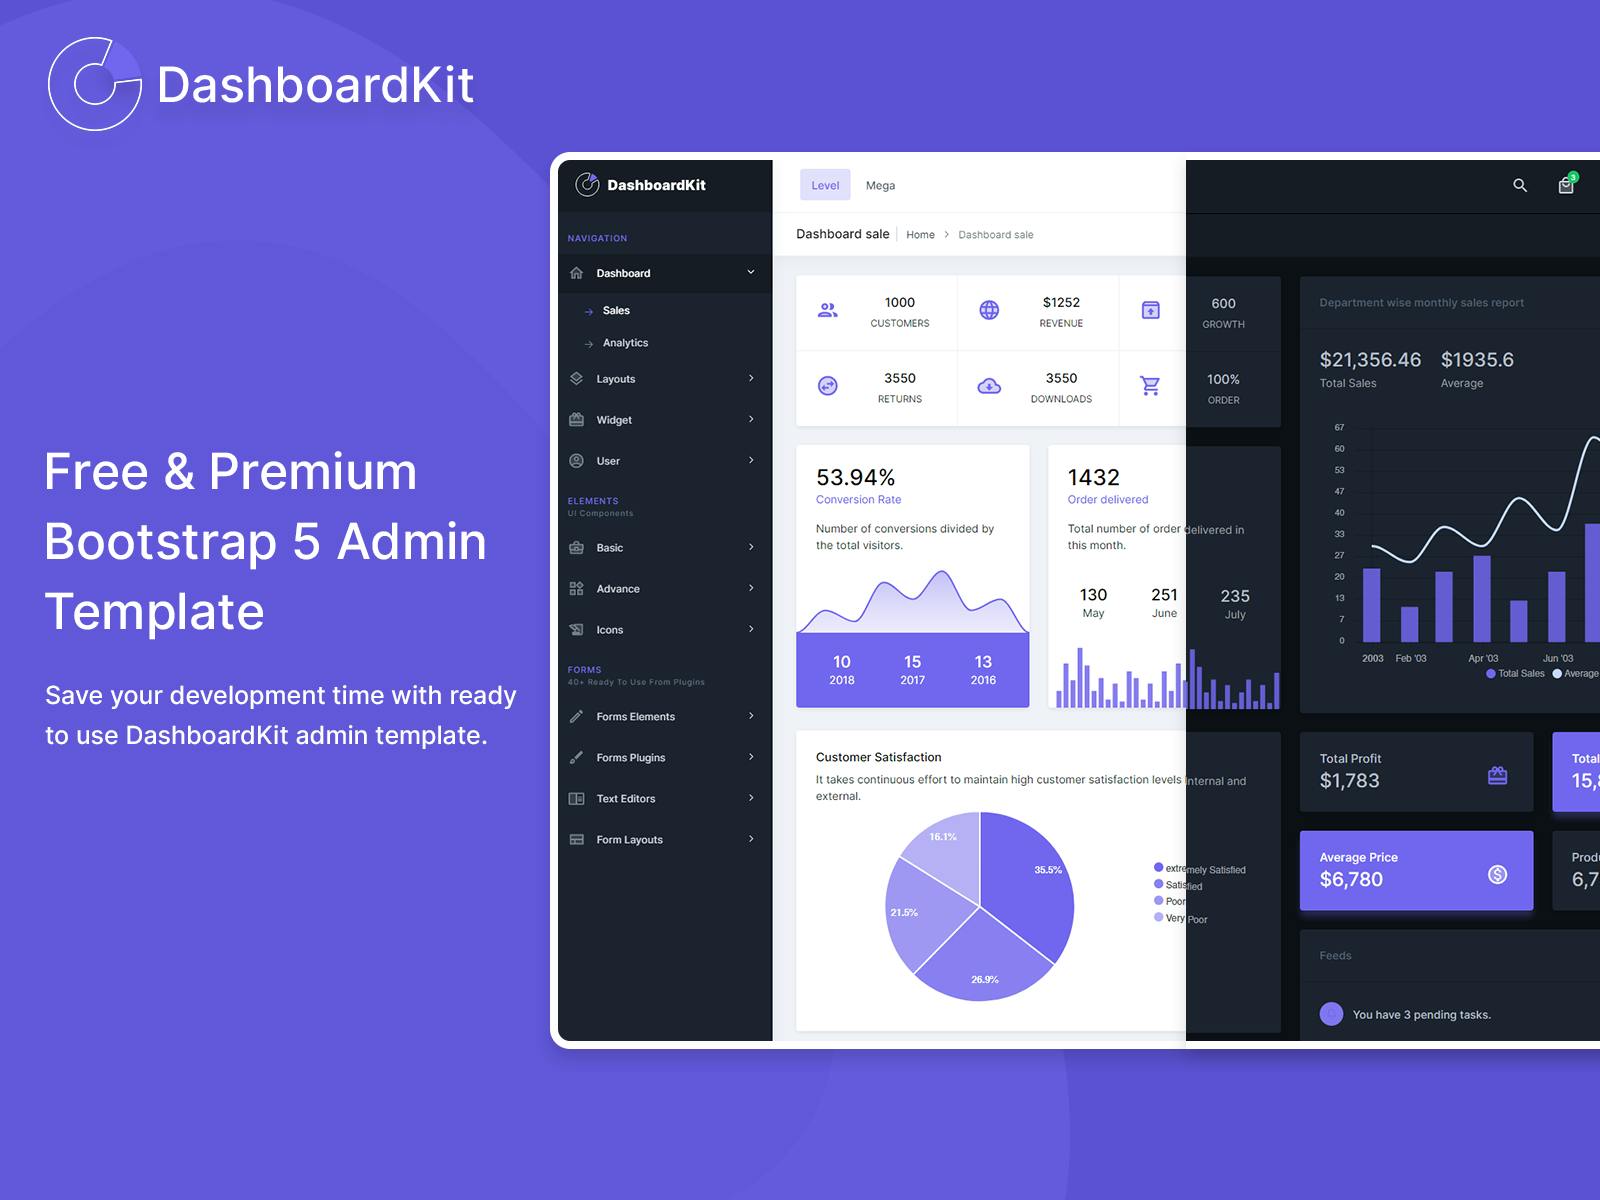 21-12-2020 - DashboardKit - Launch.png